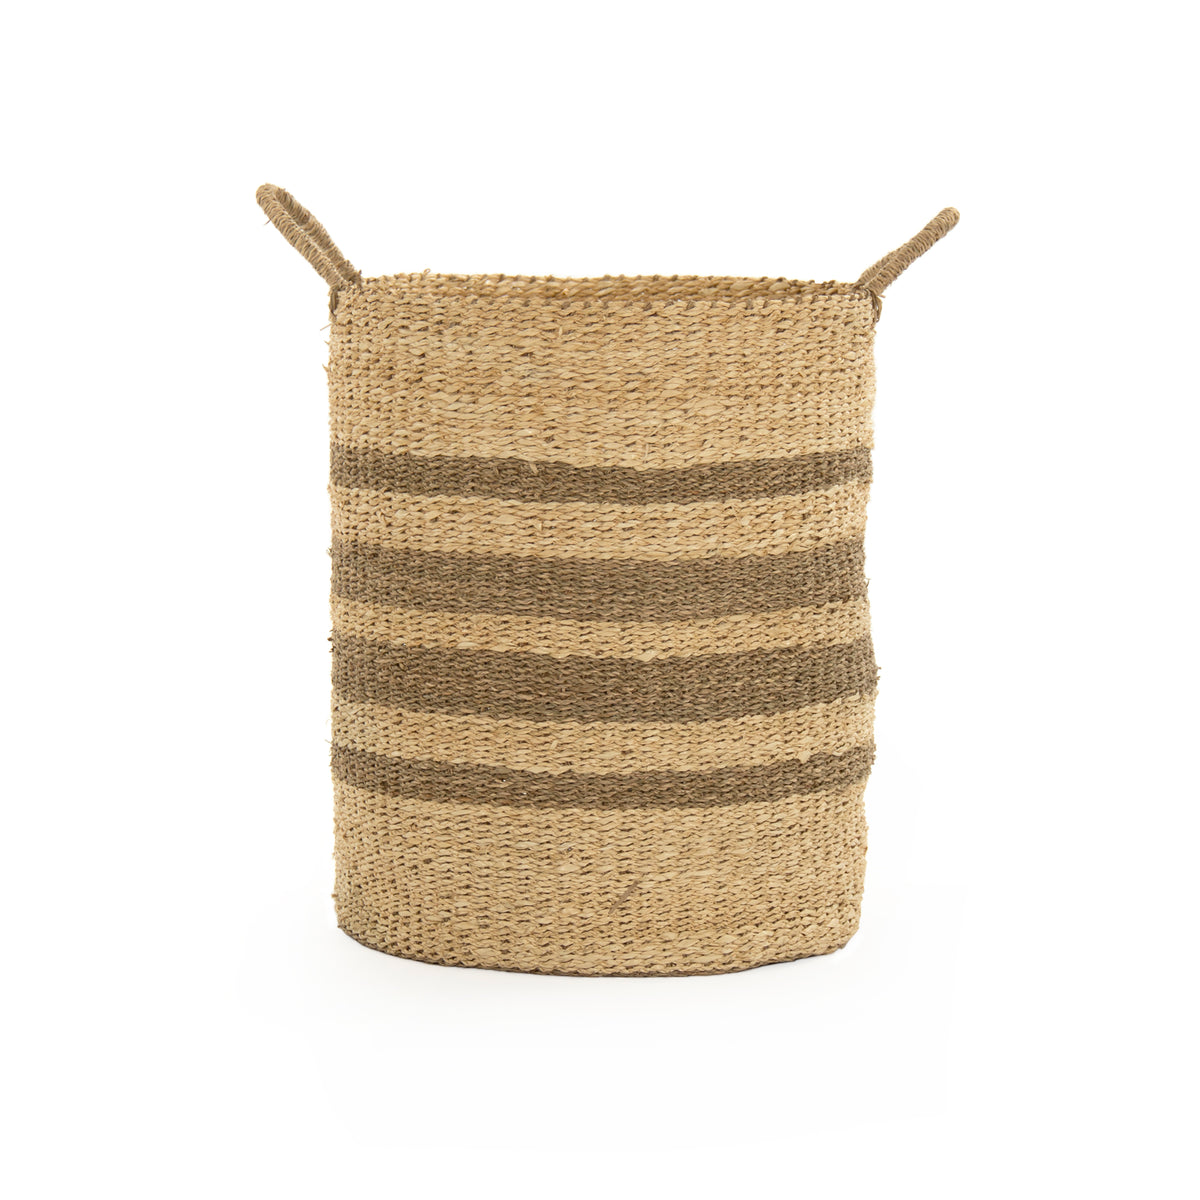 Woven Wire Basket by Zentique